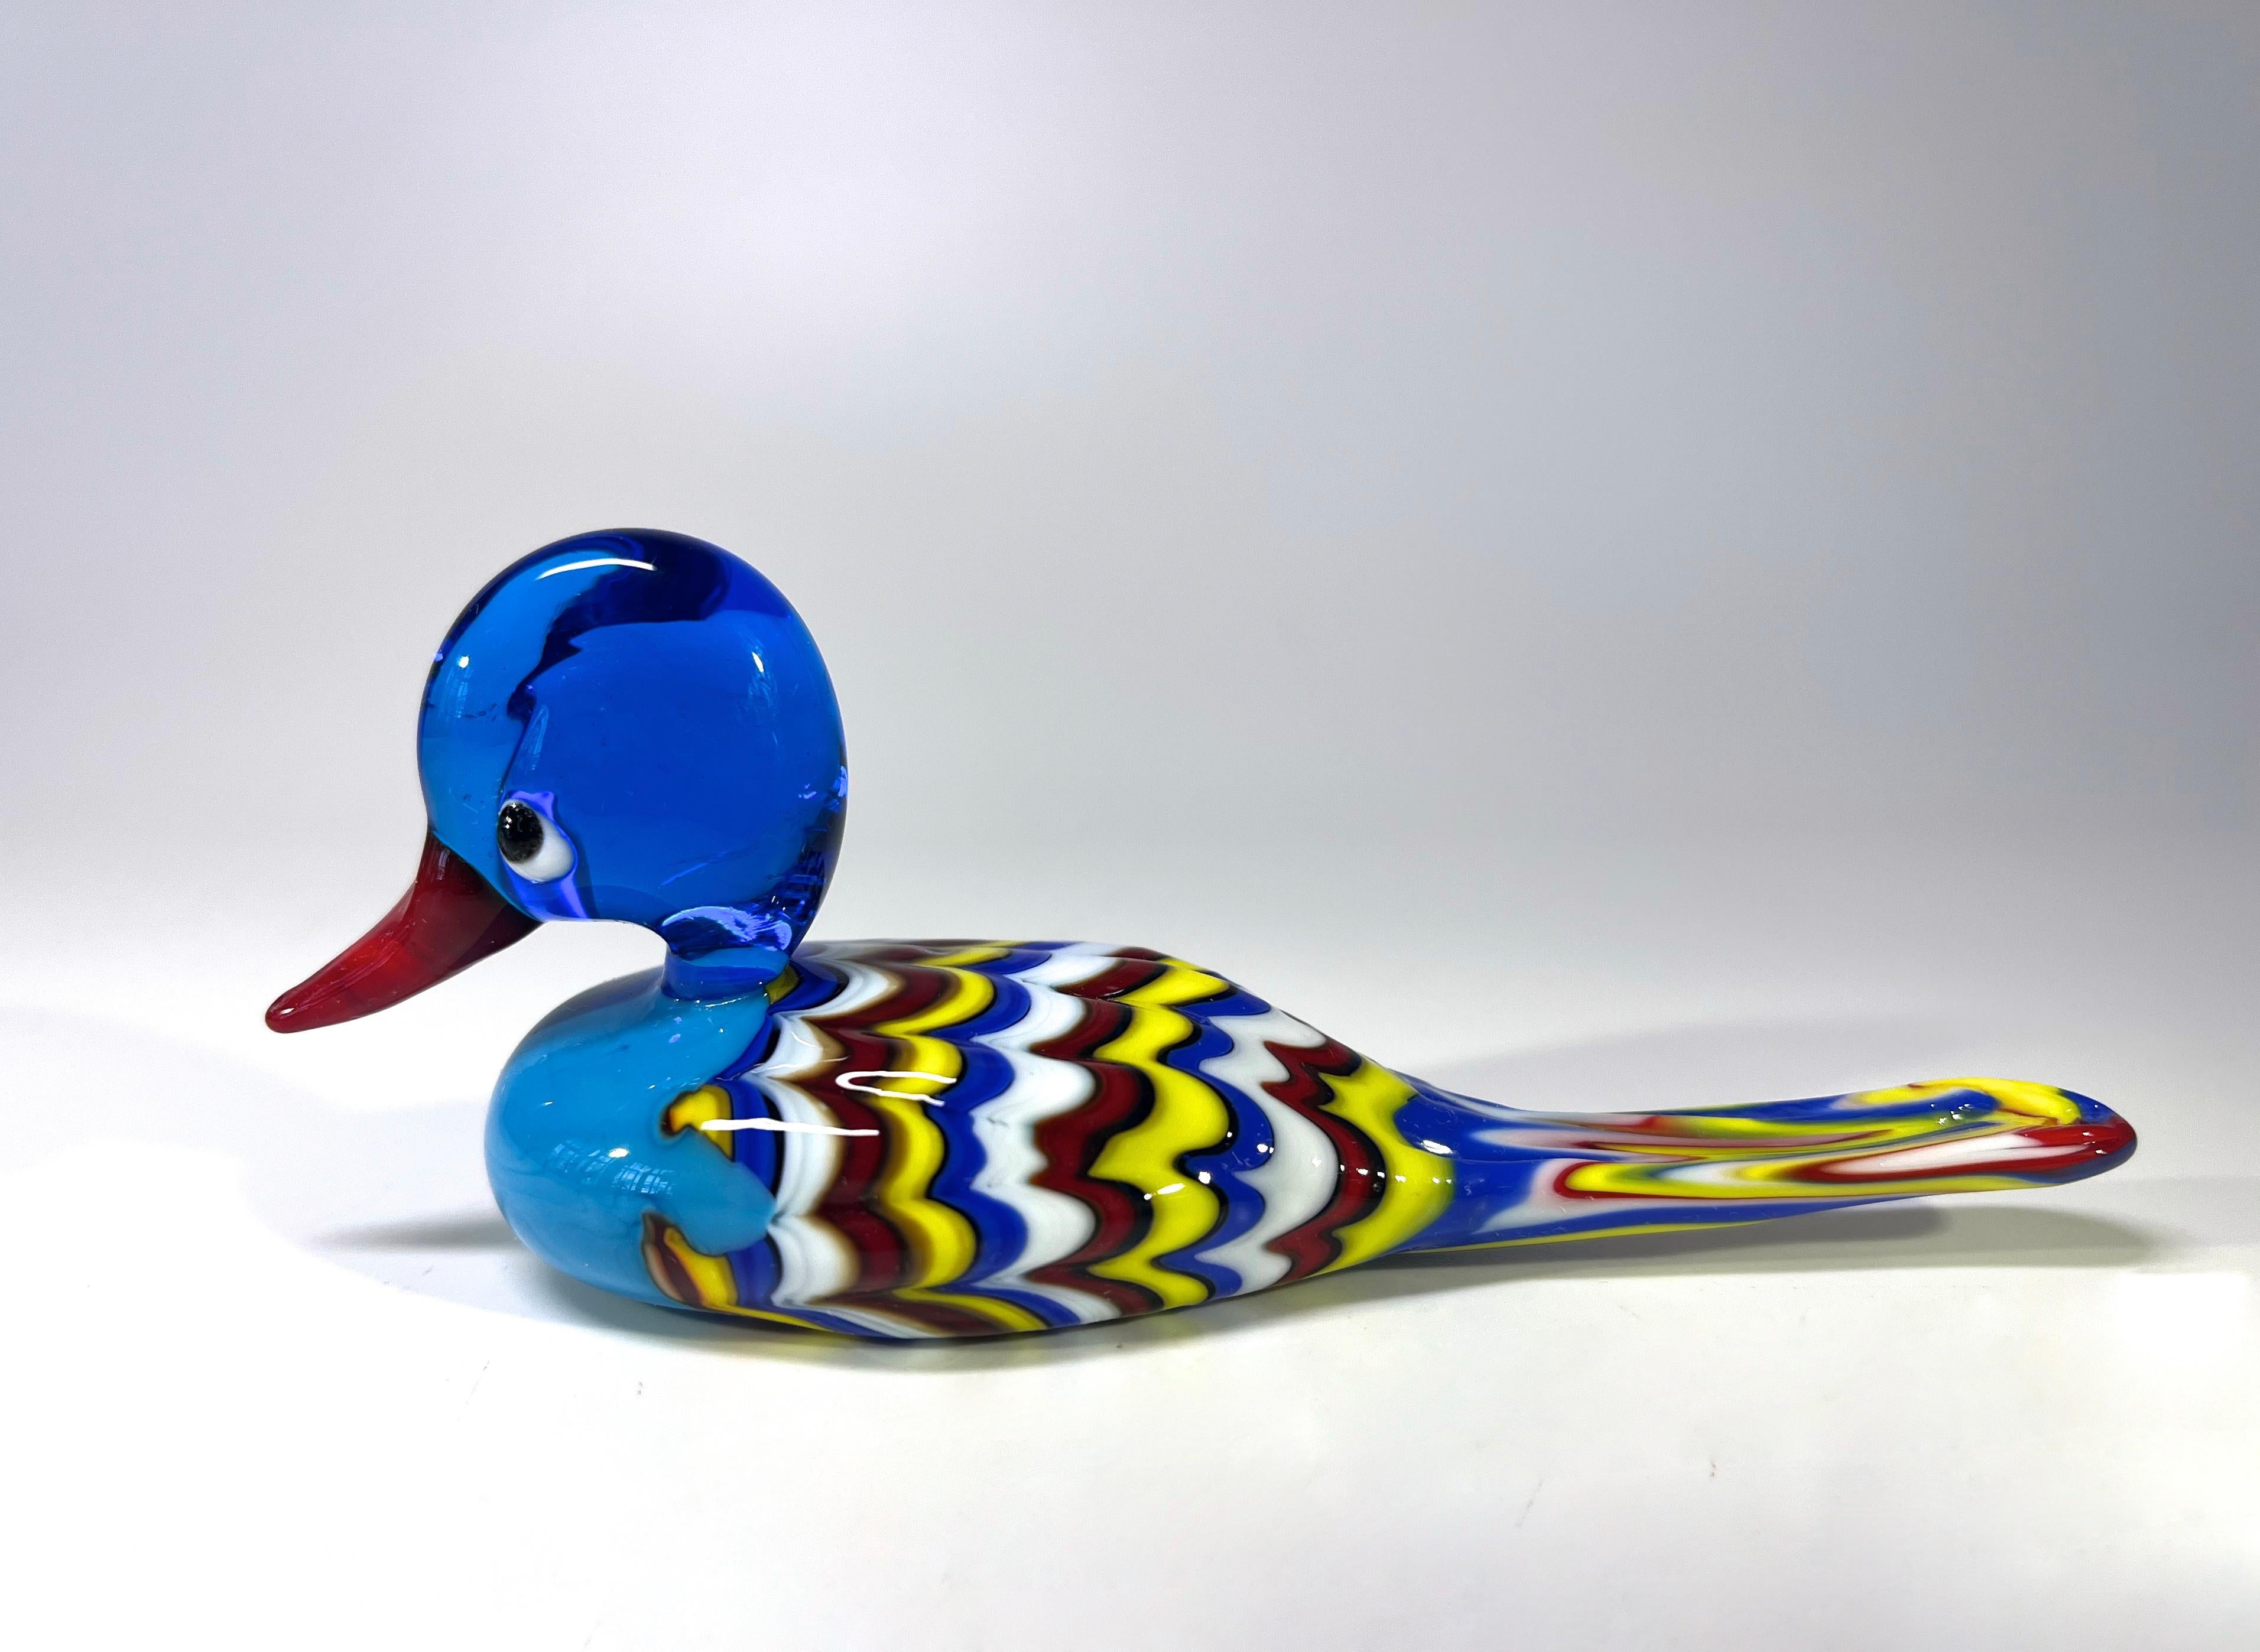 Absolutely darling little Archimede Seguso duckling figurine
Delightful hand blown glass artistry from Seguso 
Circa 1980's
Signed Archimede Seguso, Murano to base, with original label
Height 1.5 inch, Width 2 inch, Depth 4.75 inch
Excellent